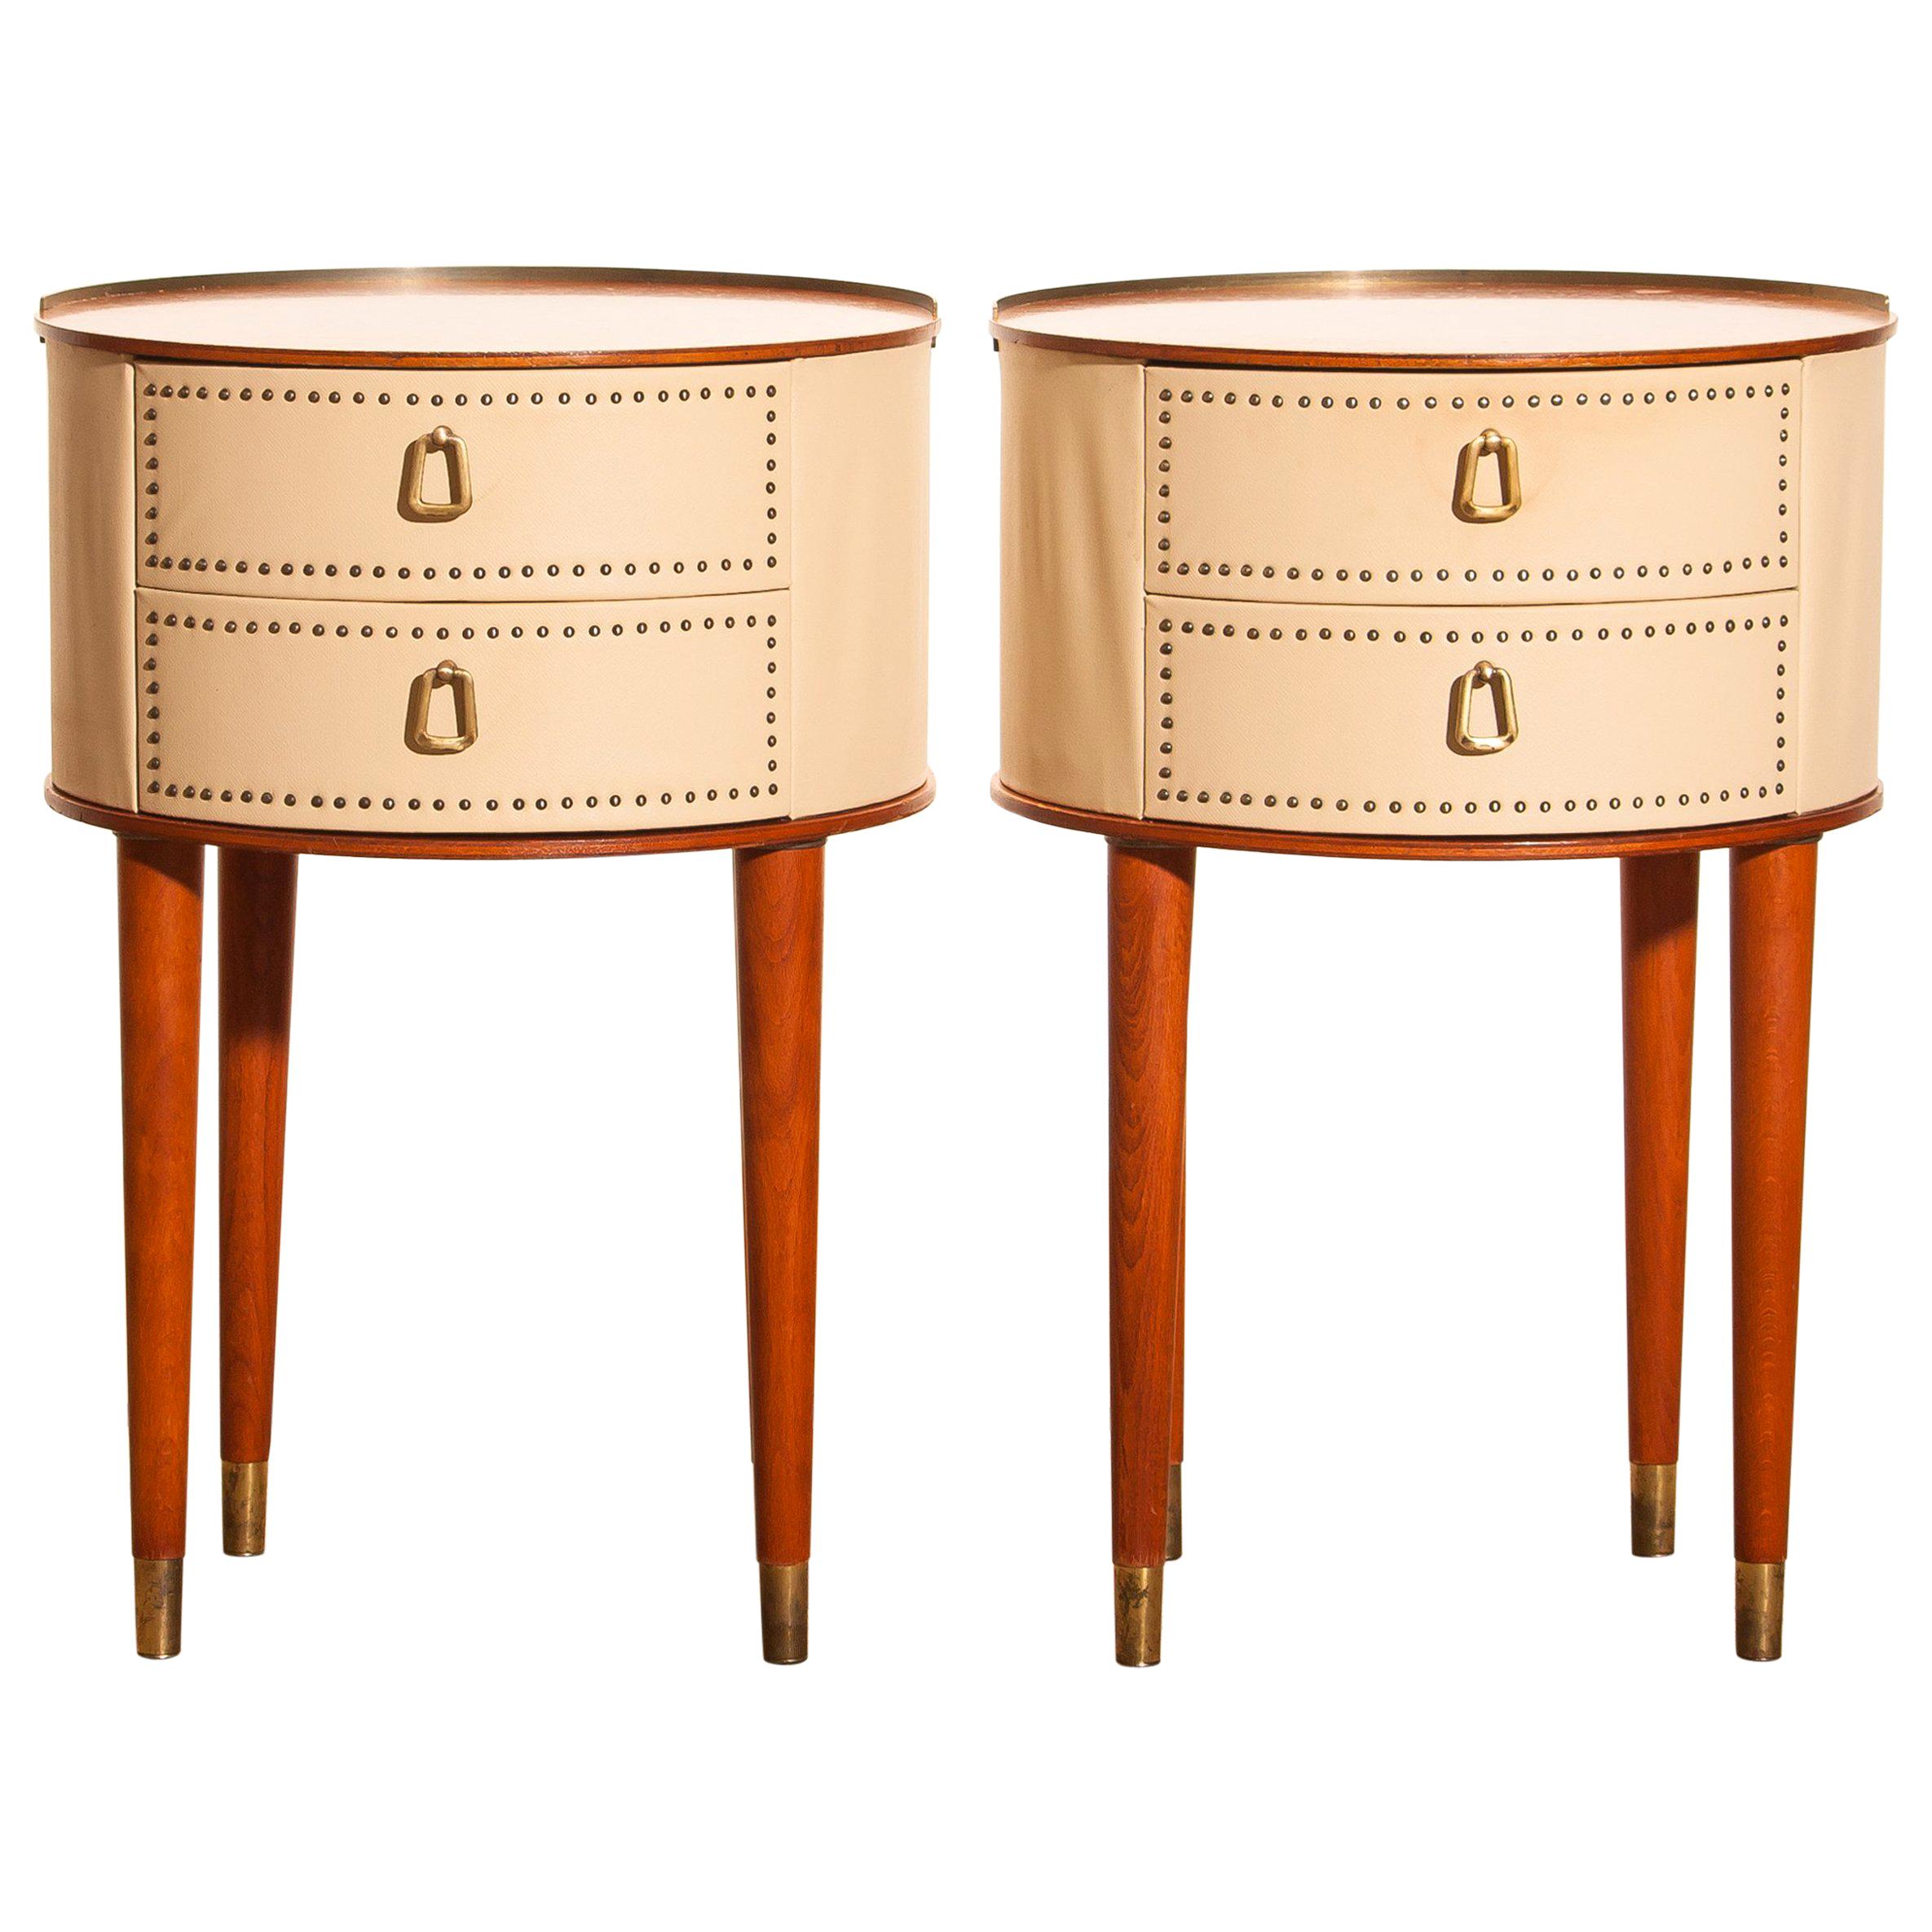 1950s, Bedside Tables in Mahogany and Brass by Halvdan Pettersson, Tibro, Sweden